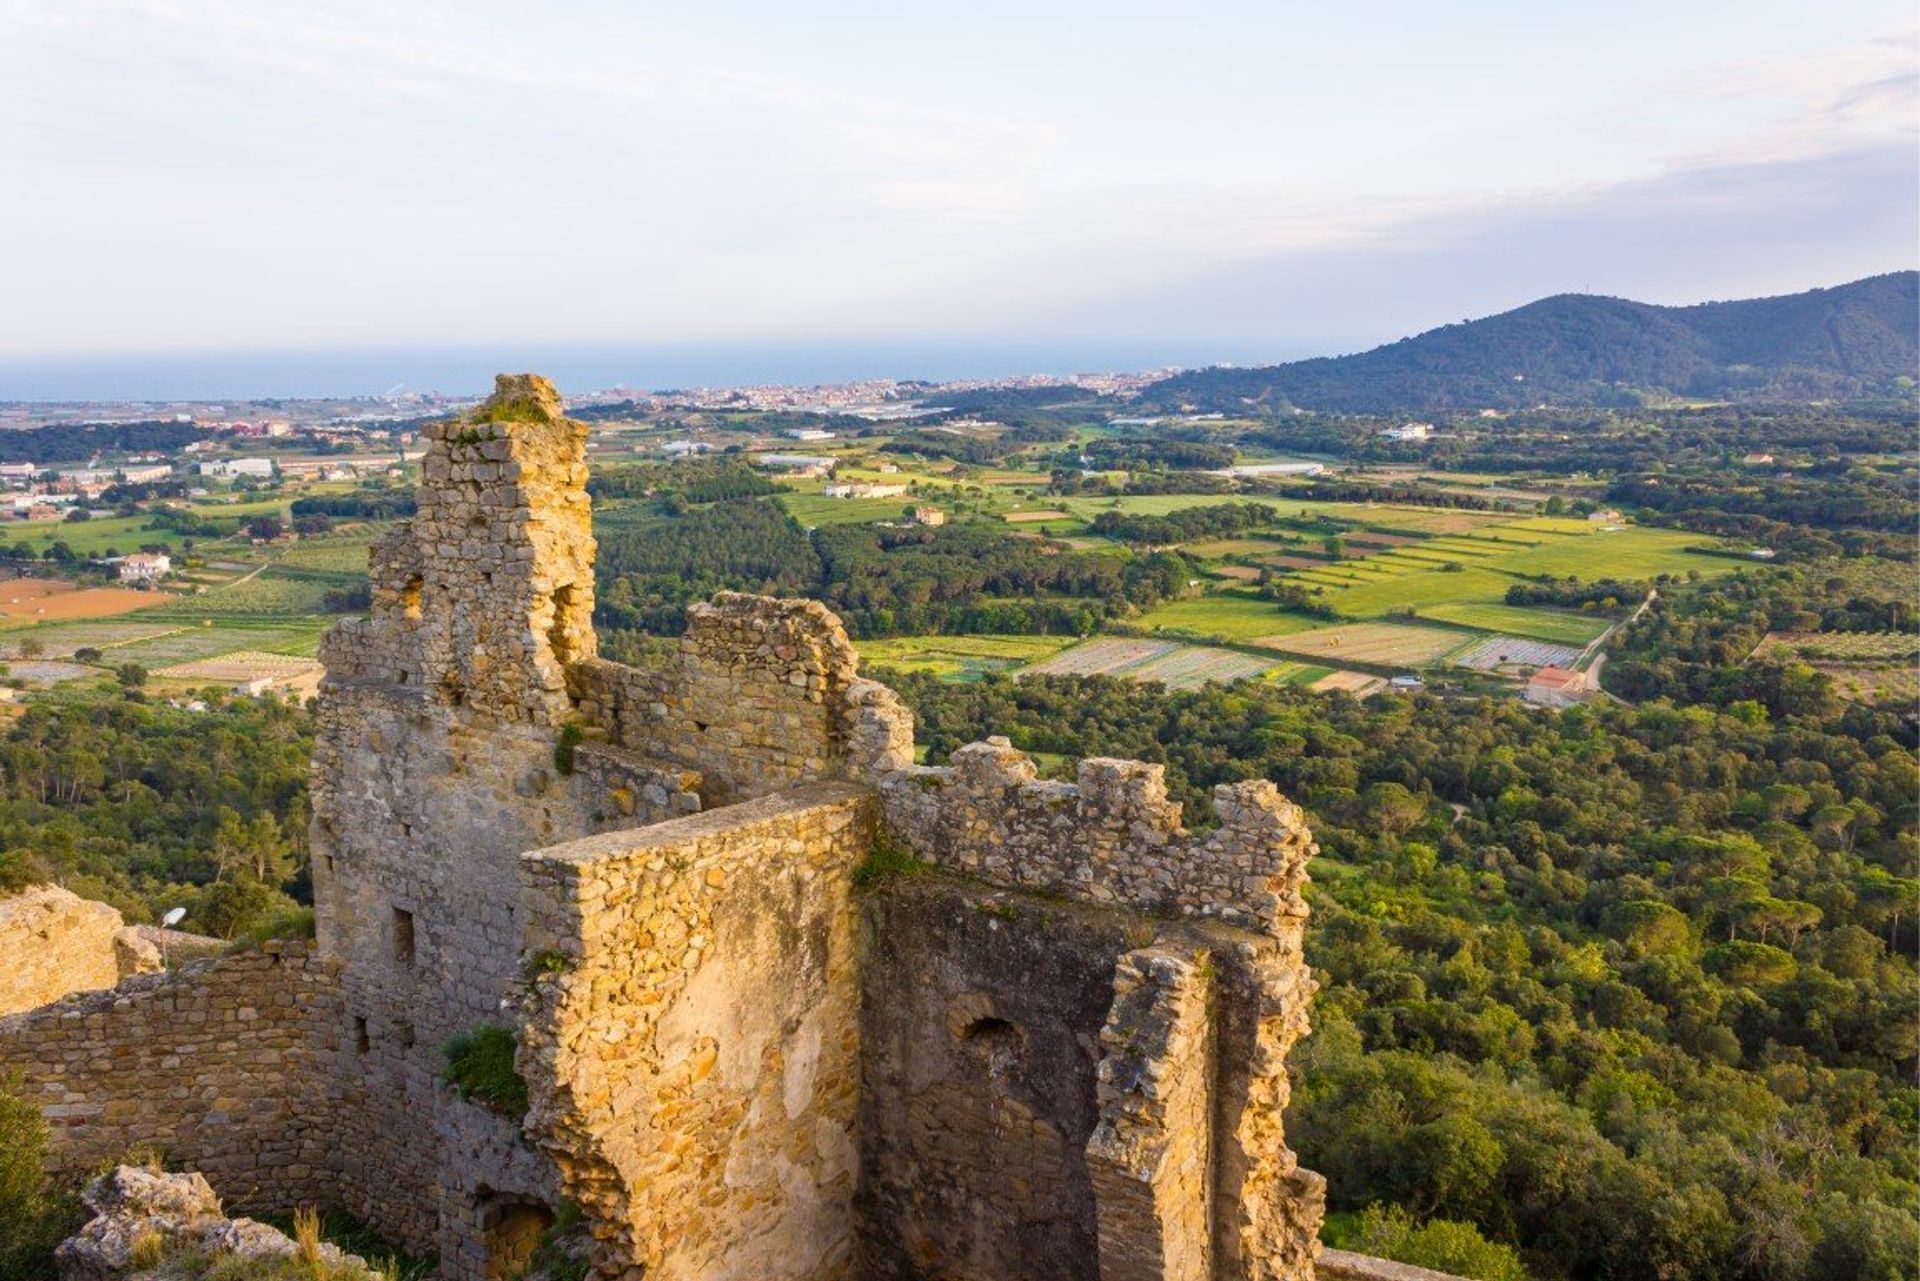 The ancient ruins of Palafolls castle, in-between Blanes and Tossa de Mar